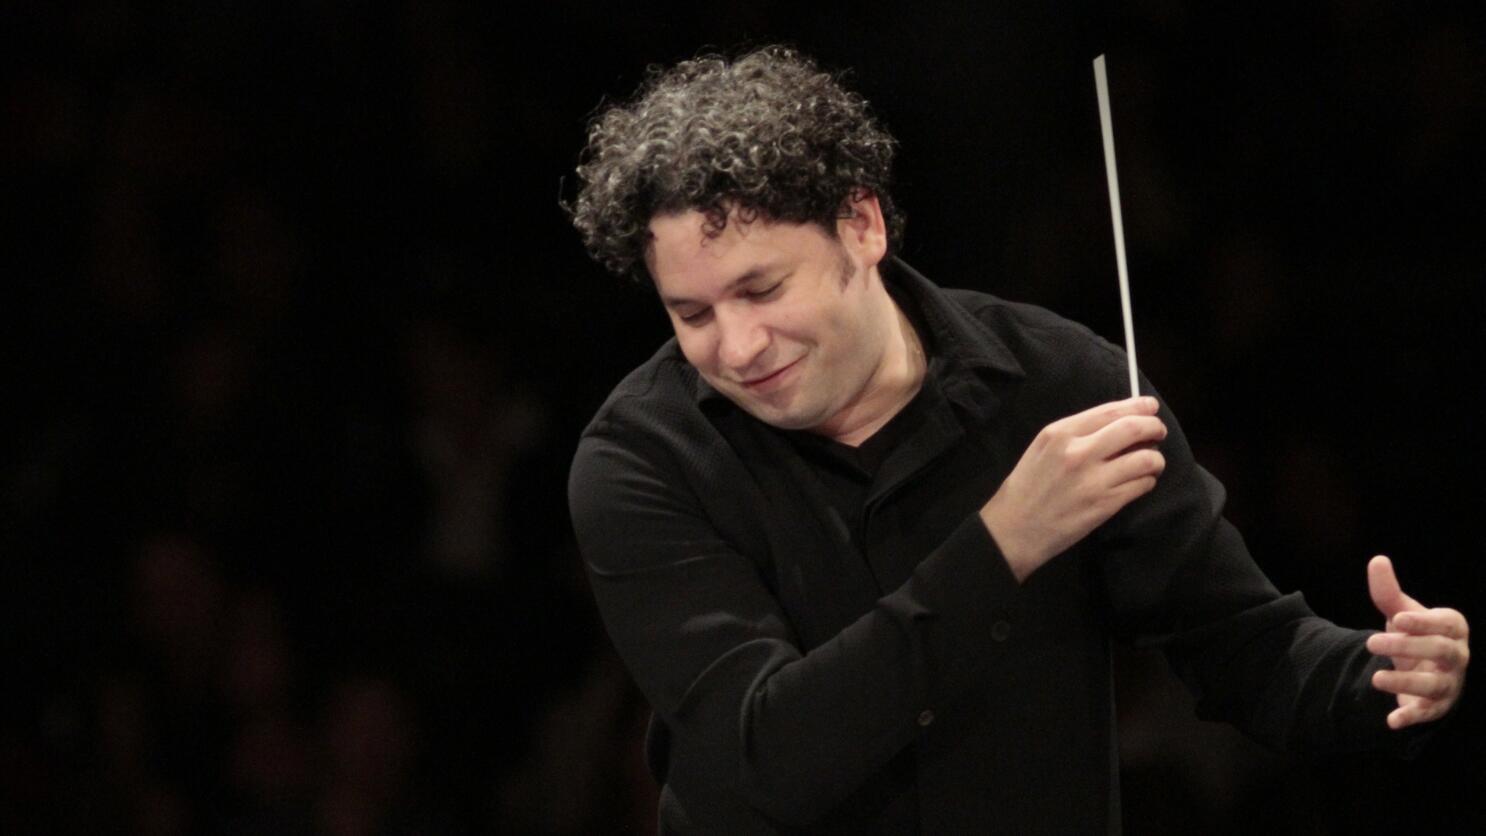 Gustavo Dudamel learns to conduct his career - Los Angeles Times